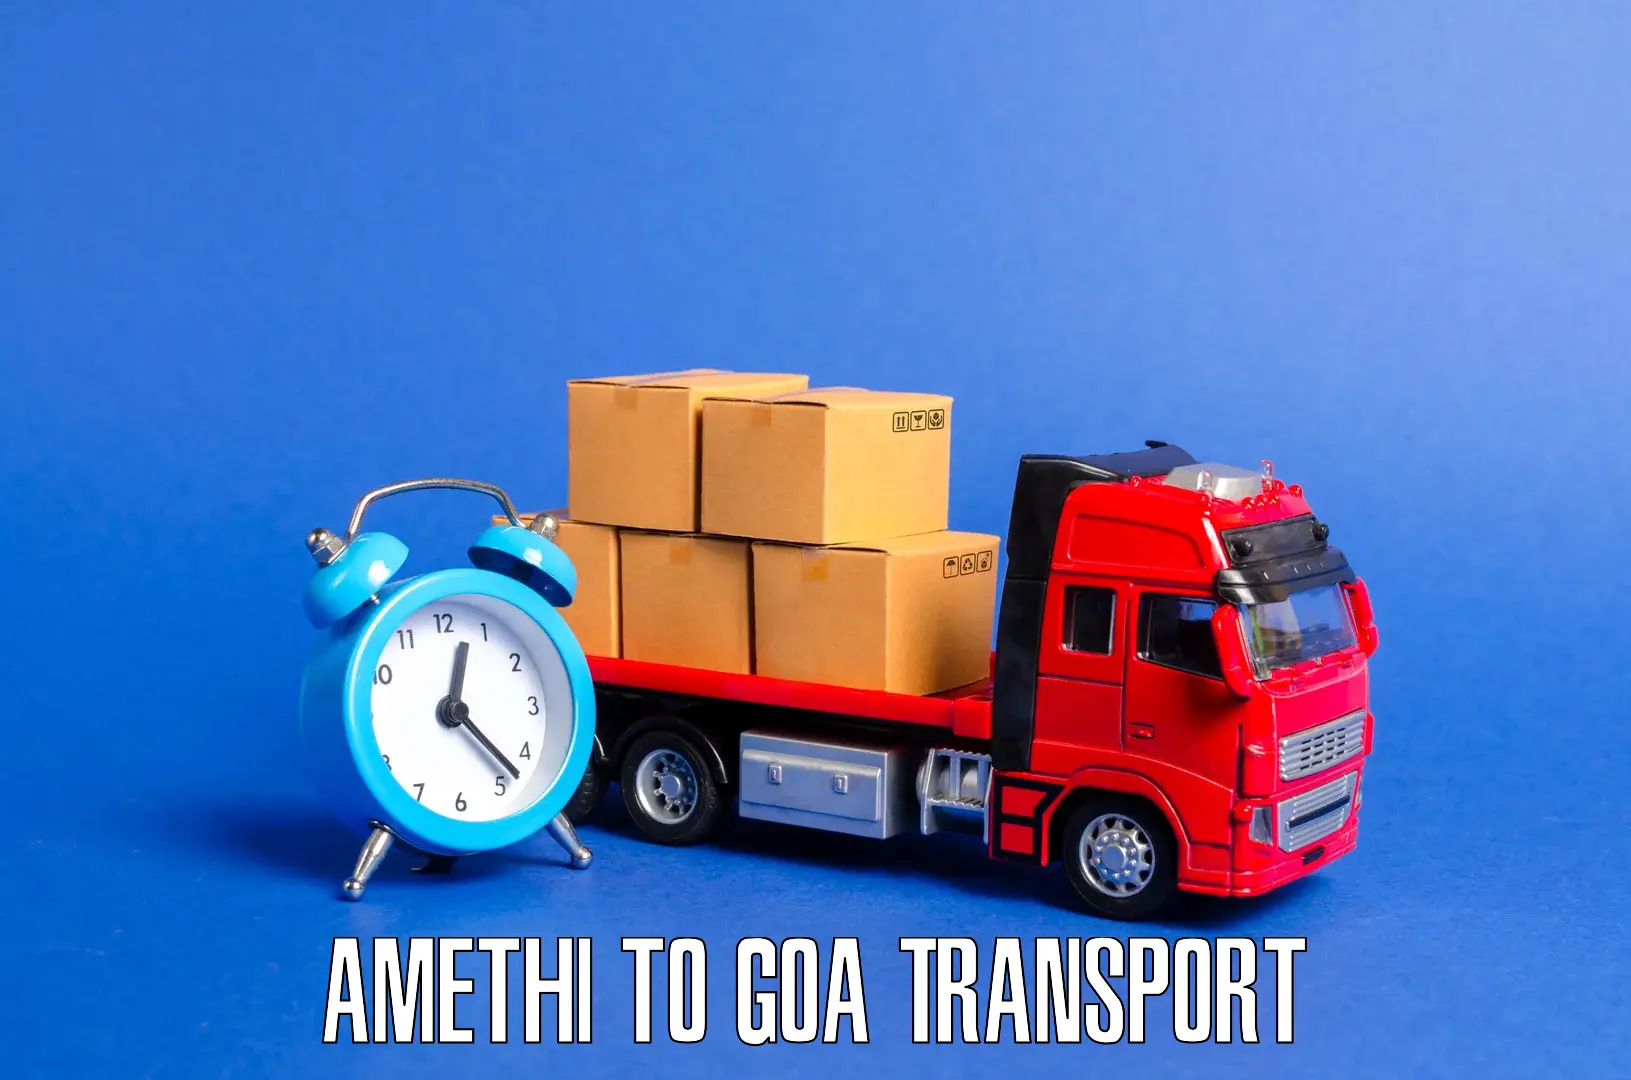 Commercial transport service Amethi to Panaji